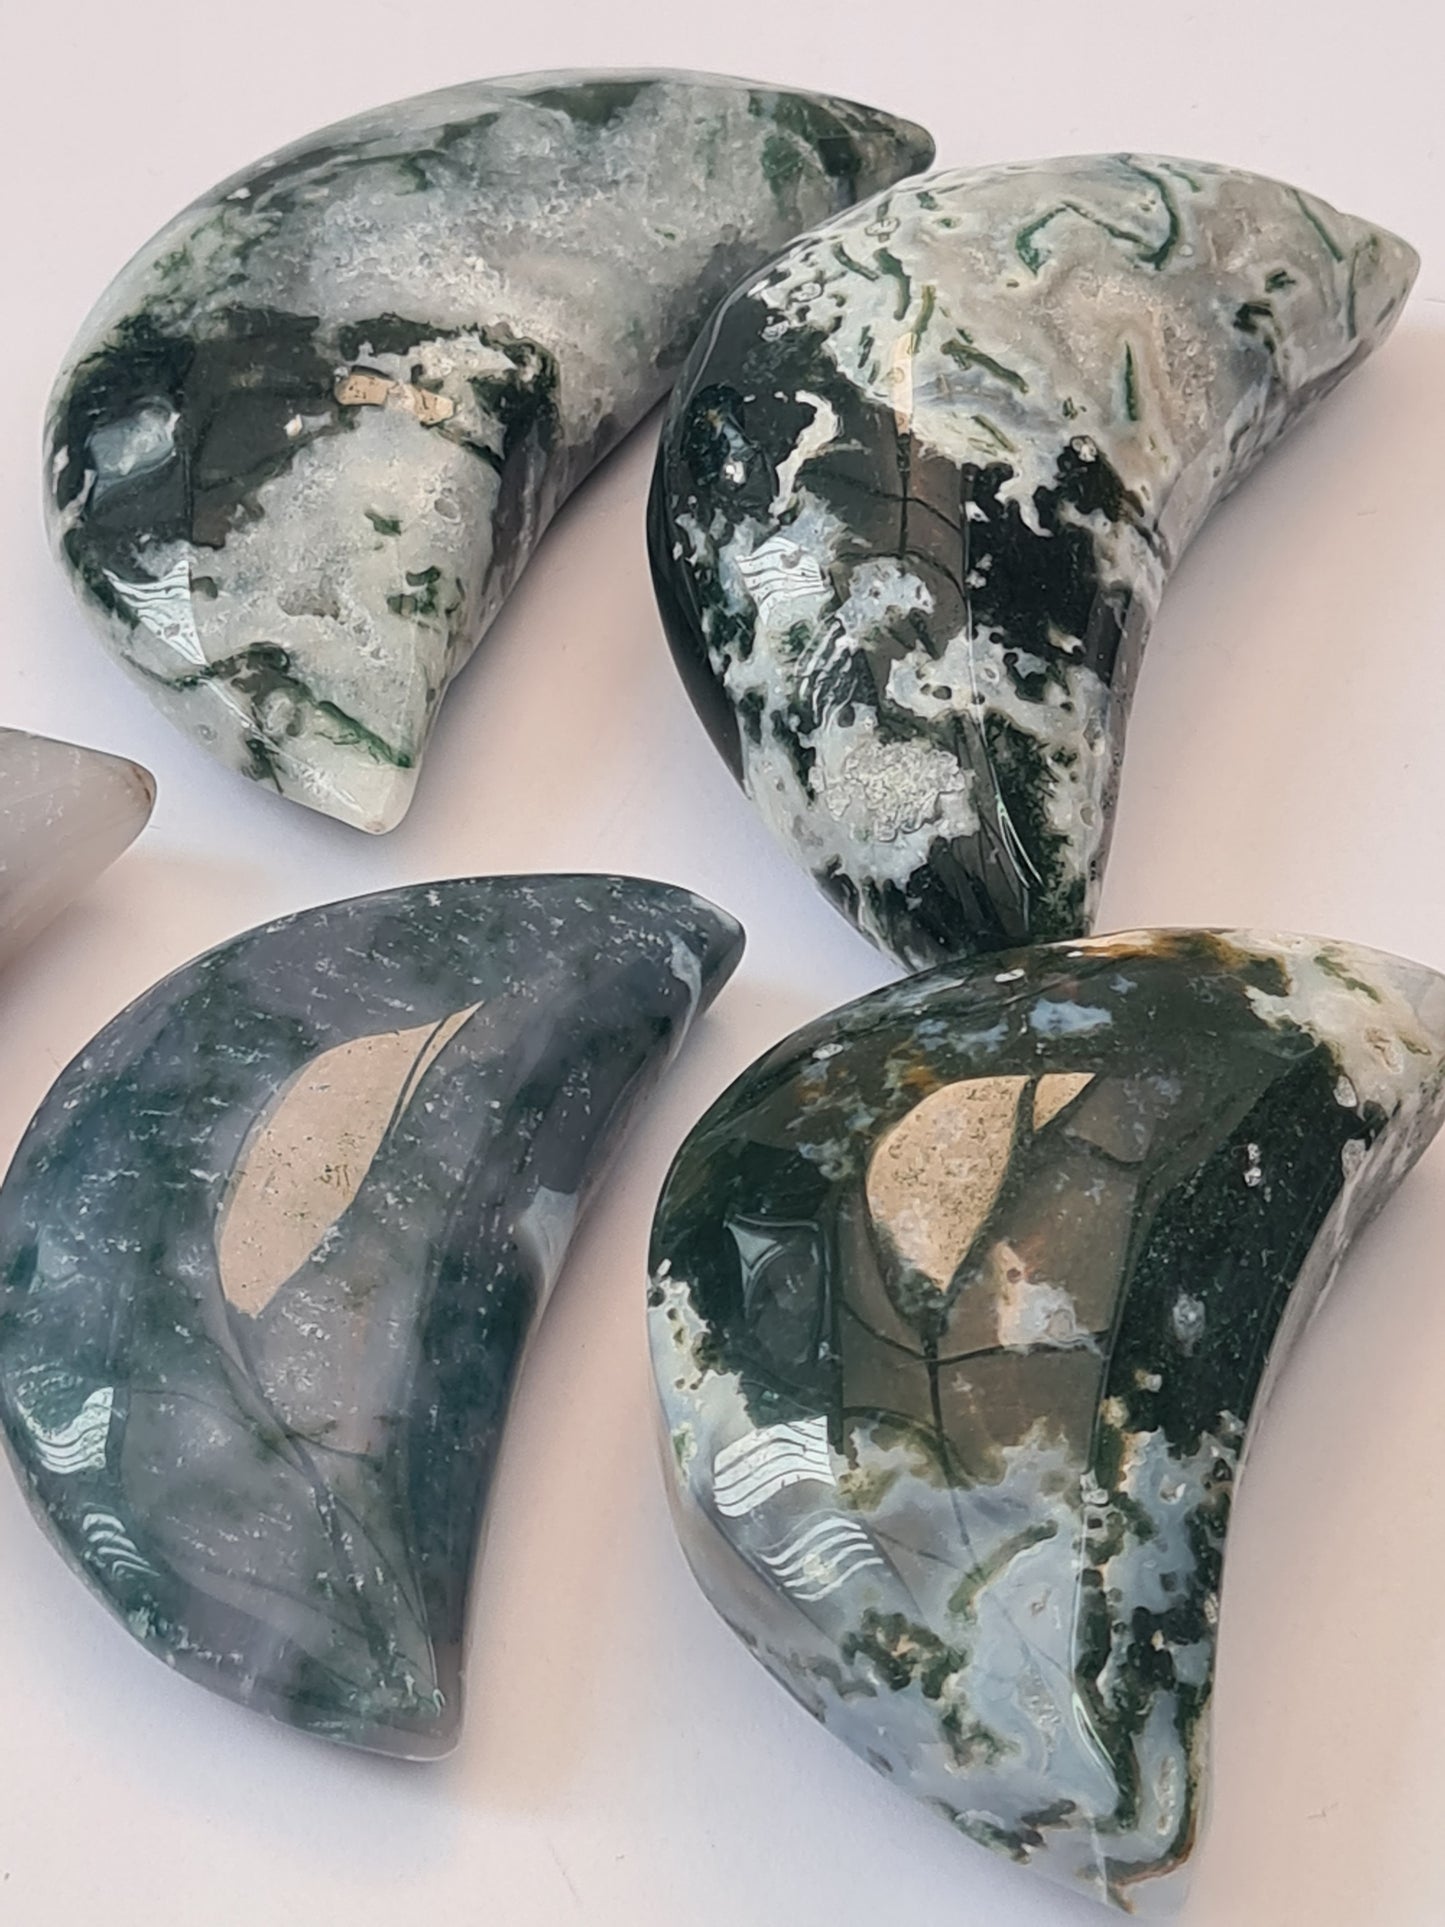 Moss Agate Crescent Moon Carvings. Green with blue and white chalcedony. Four shown on a white background.